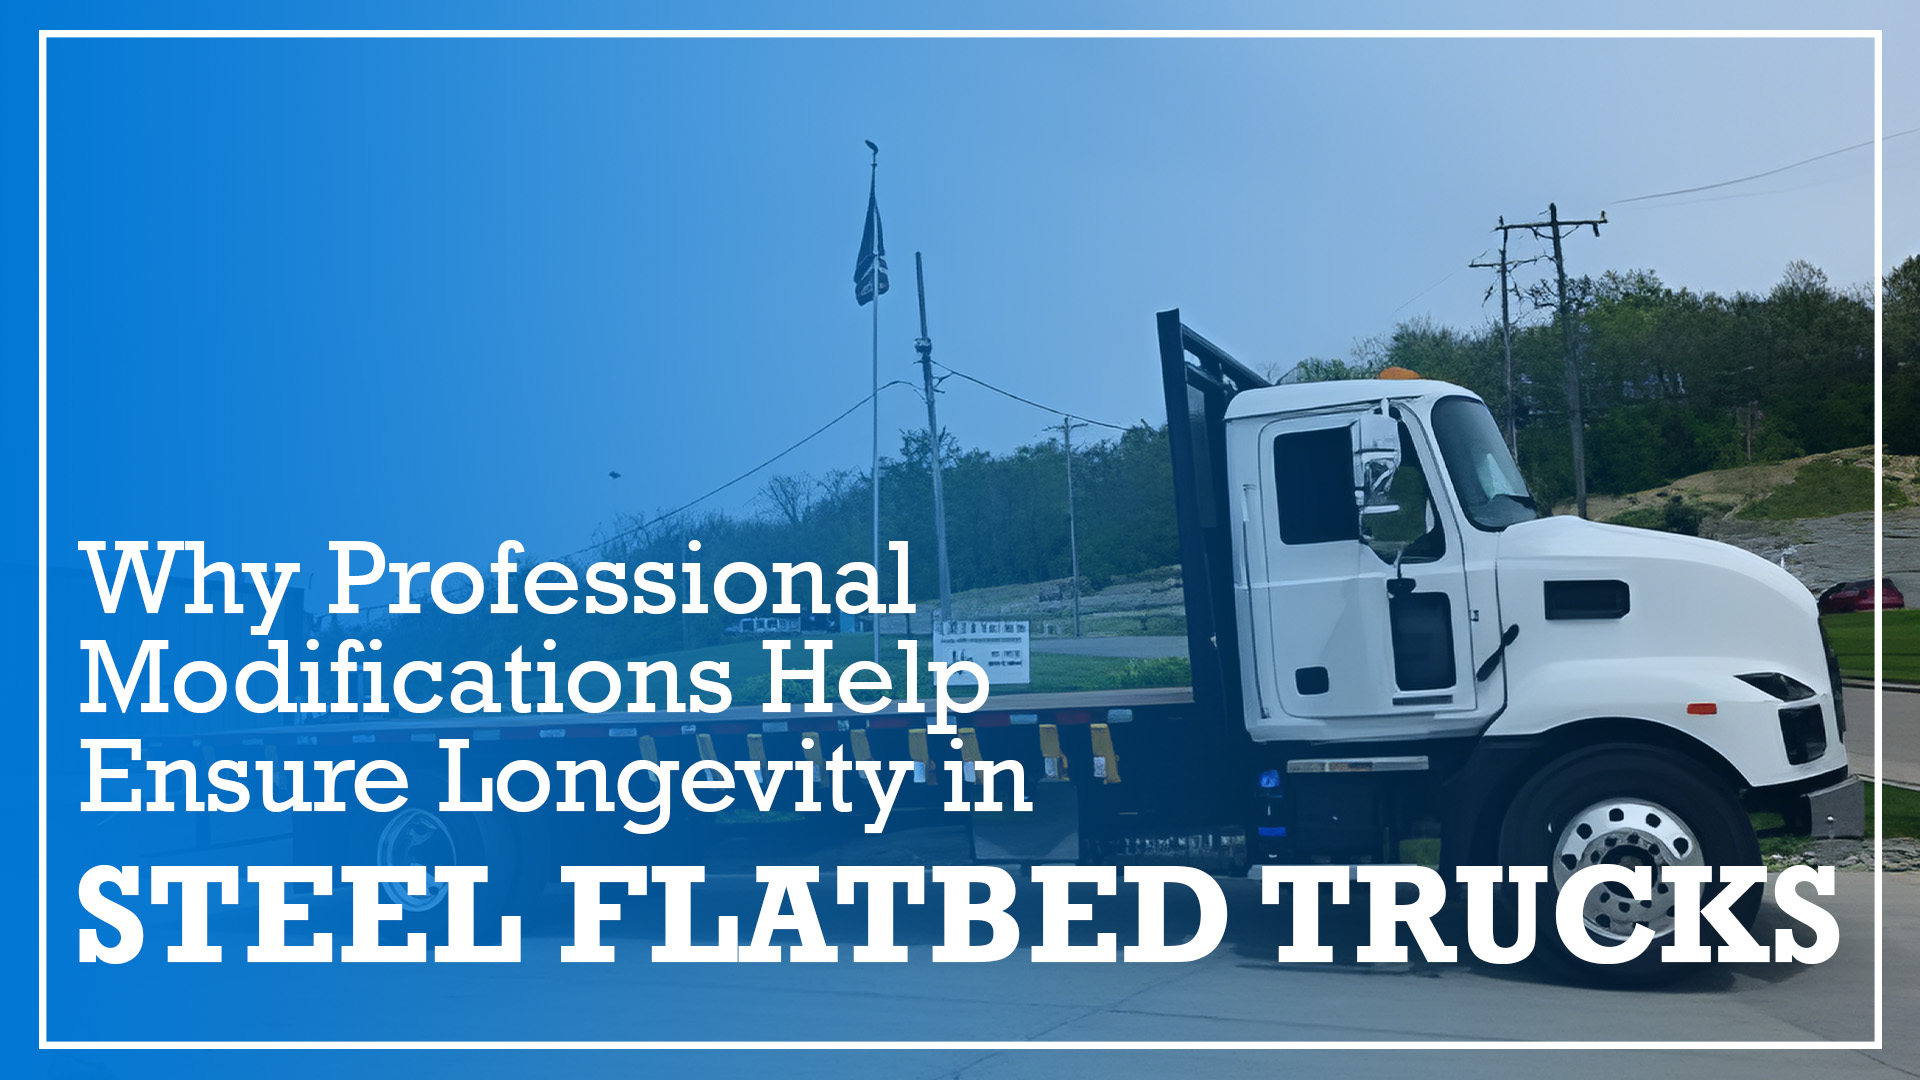 A flatbed truck texts reads Why professional modifications help ensure longevity in steel flatbed trucks